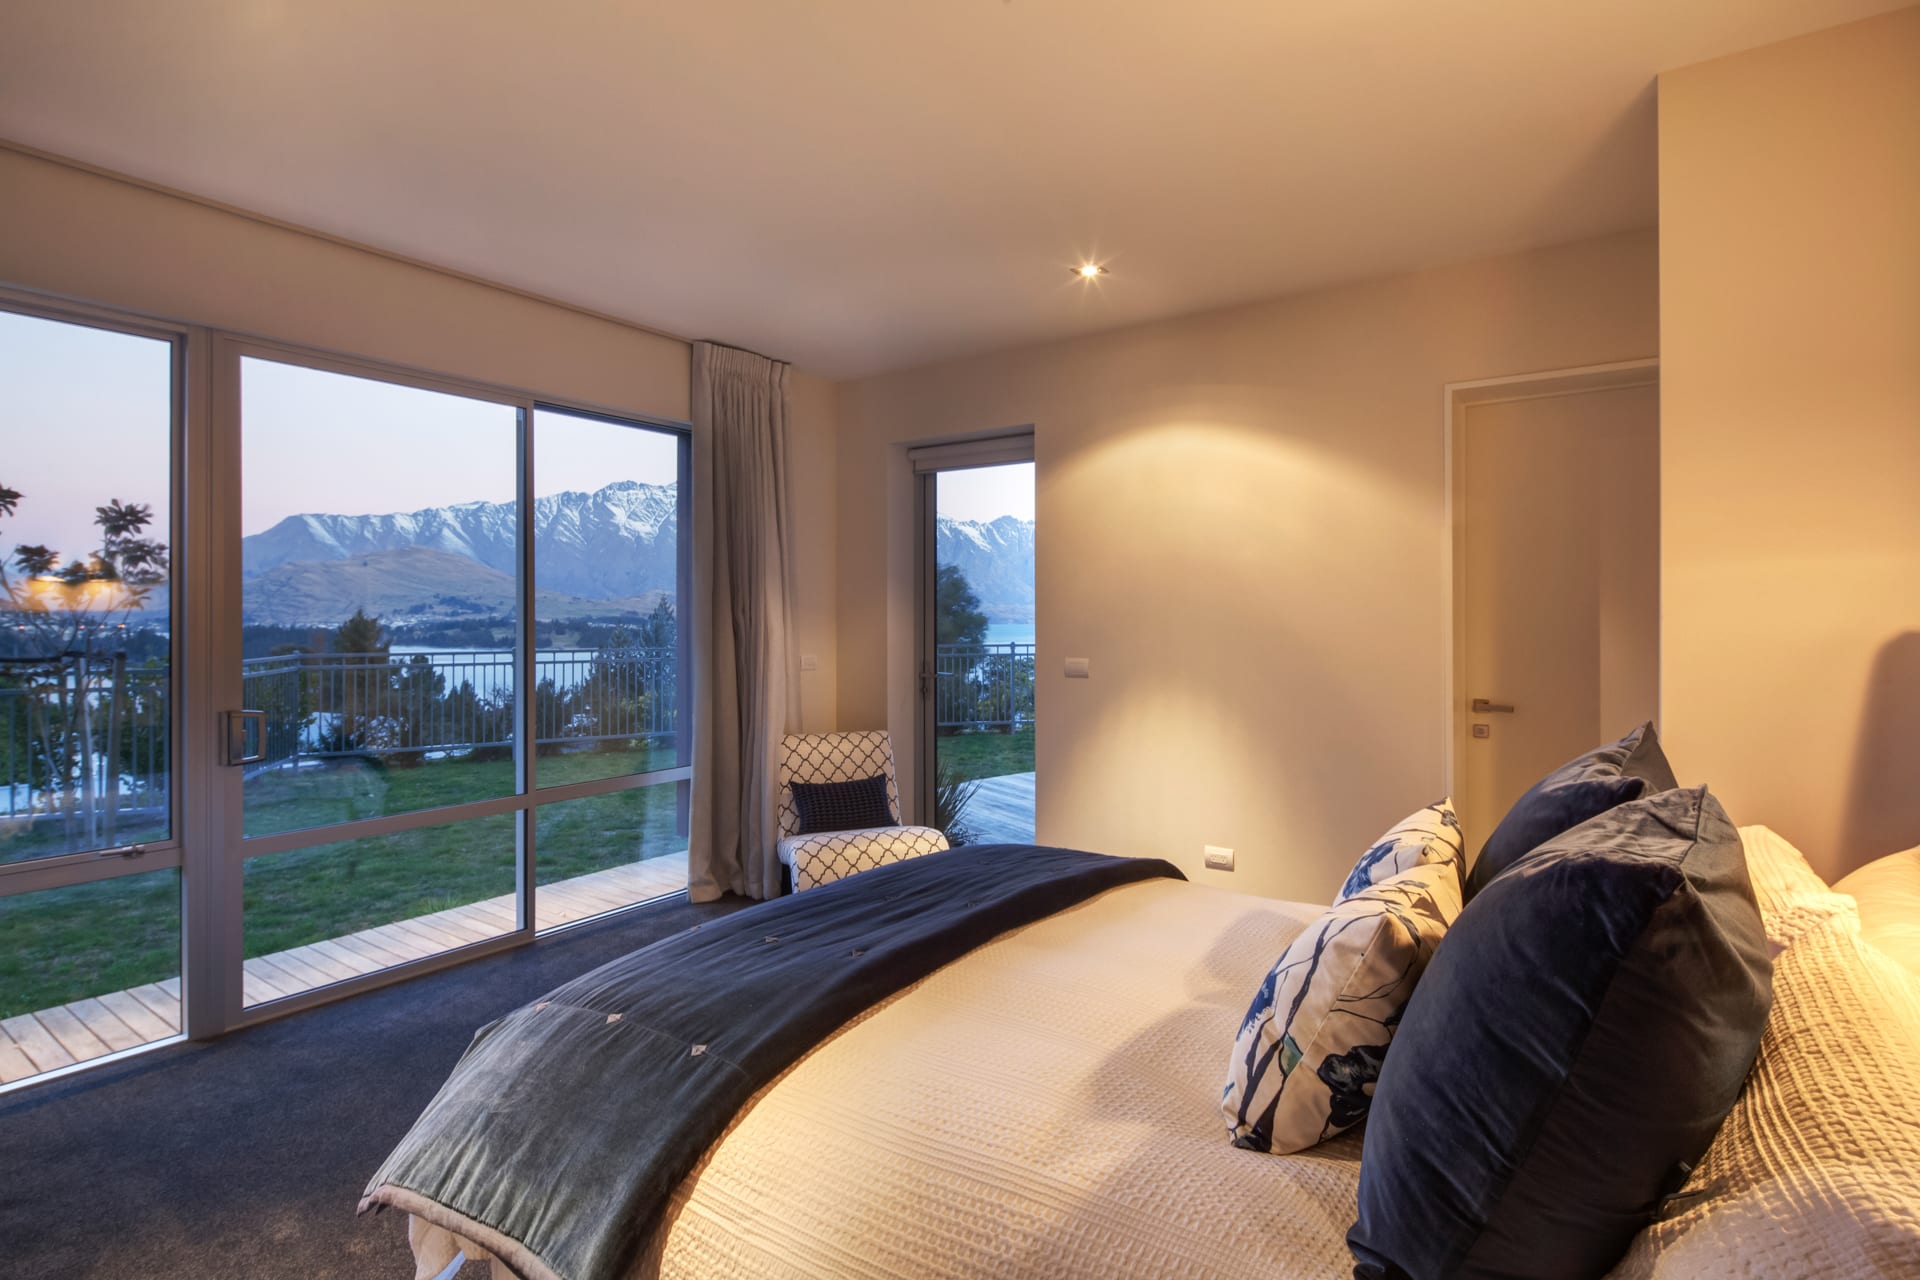 Bedroom 1 with beautiful views